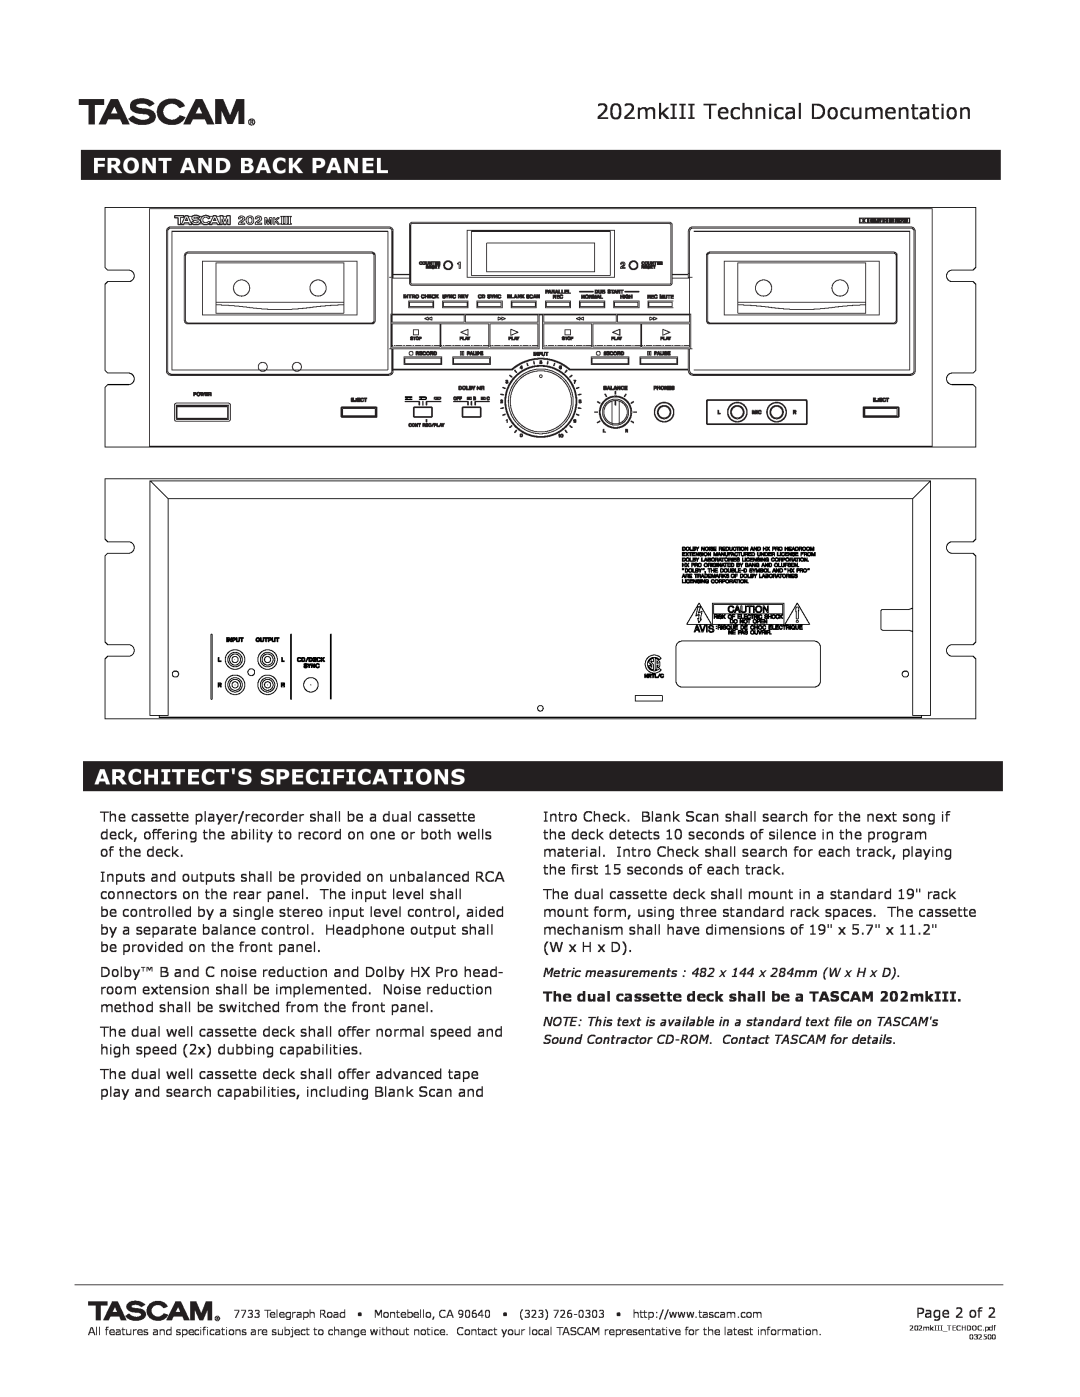 Tascam specifications 202mkIII Technical Documentation, Front And Back Panel Architects Specifications 